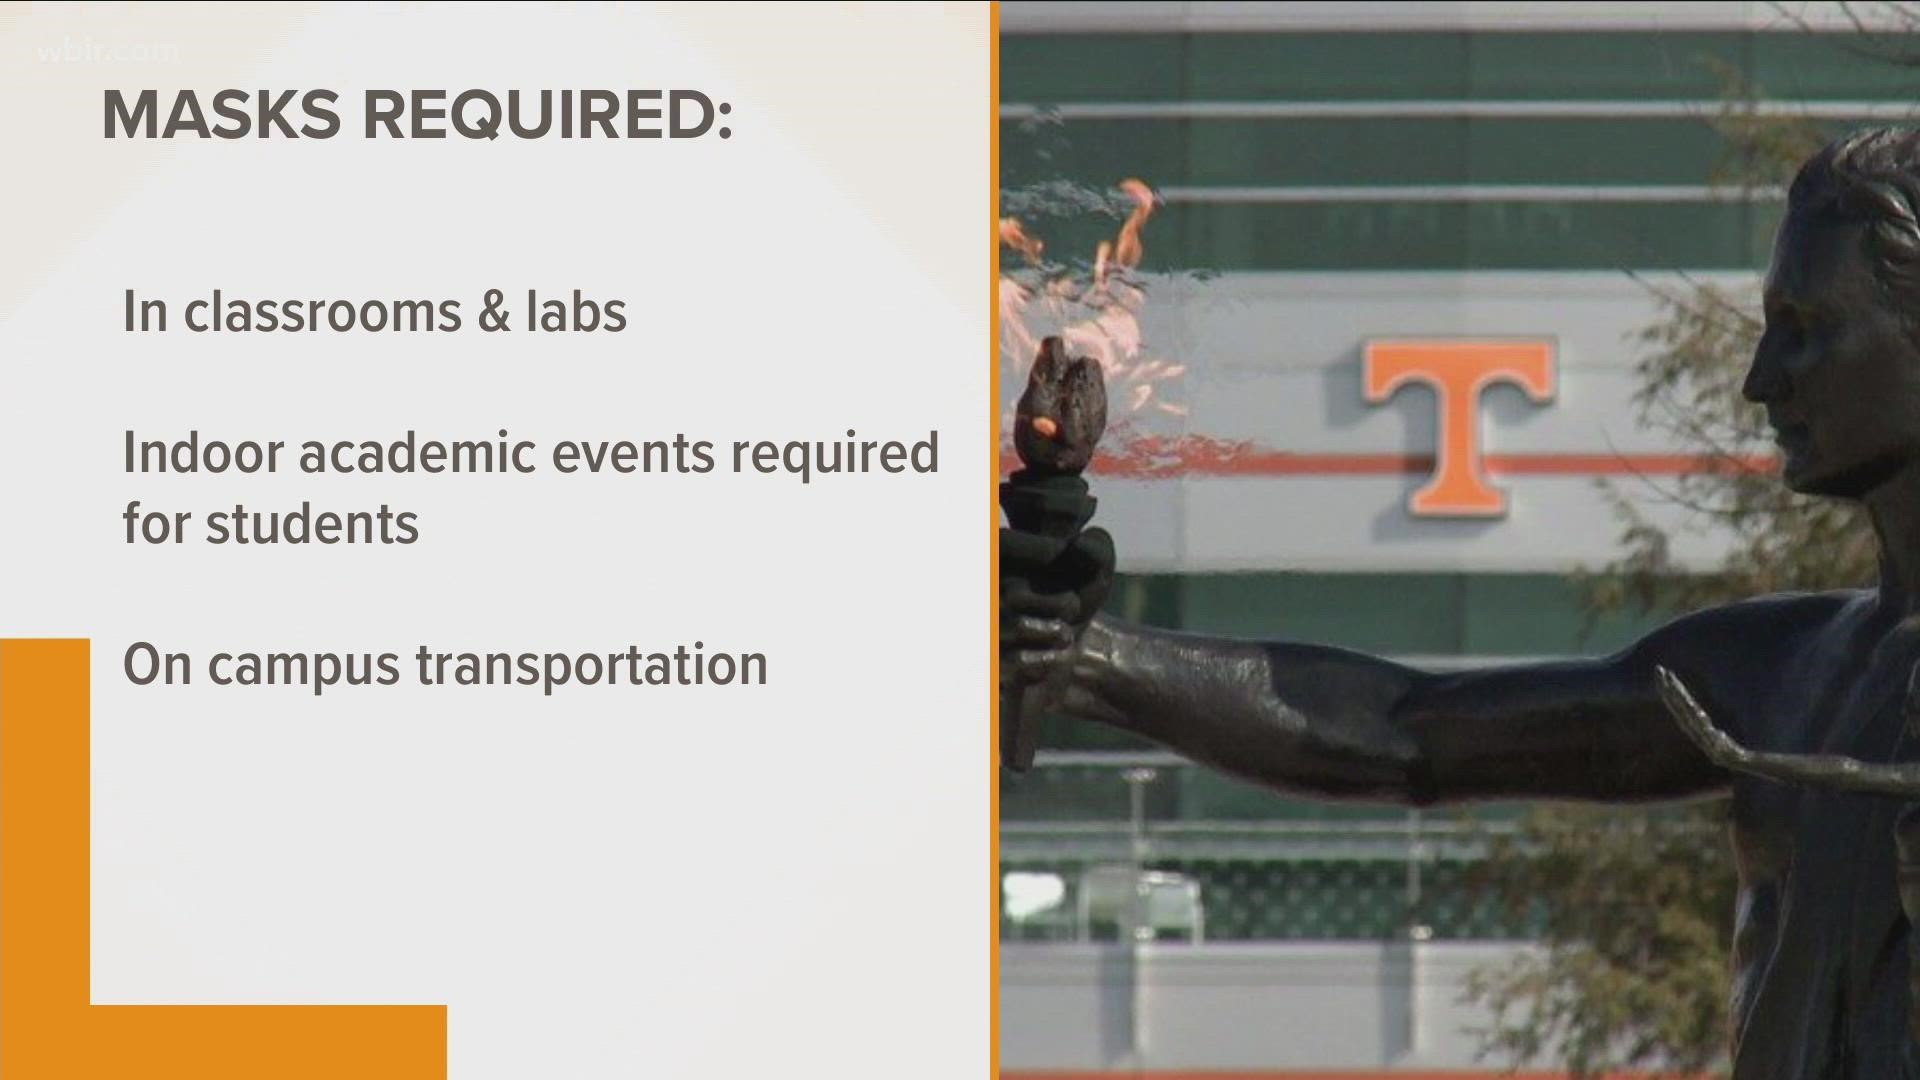 Masks will be required in classrooms, laboratories, and for indoor academic events requires for students such as orientation, UT officials said.